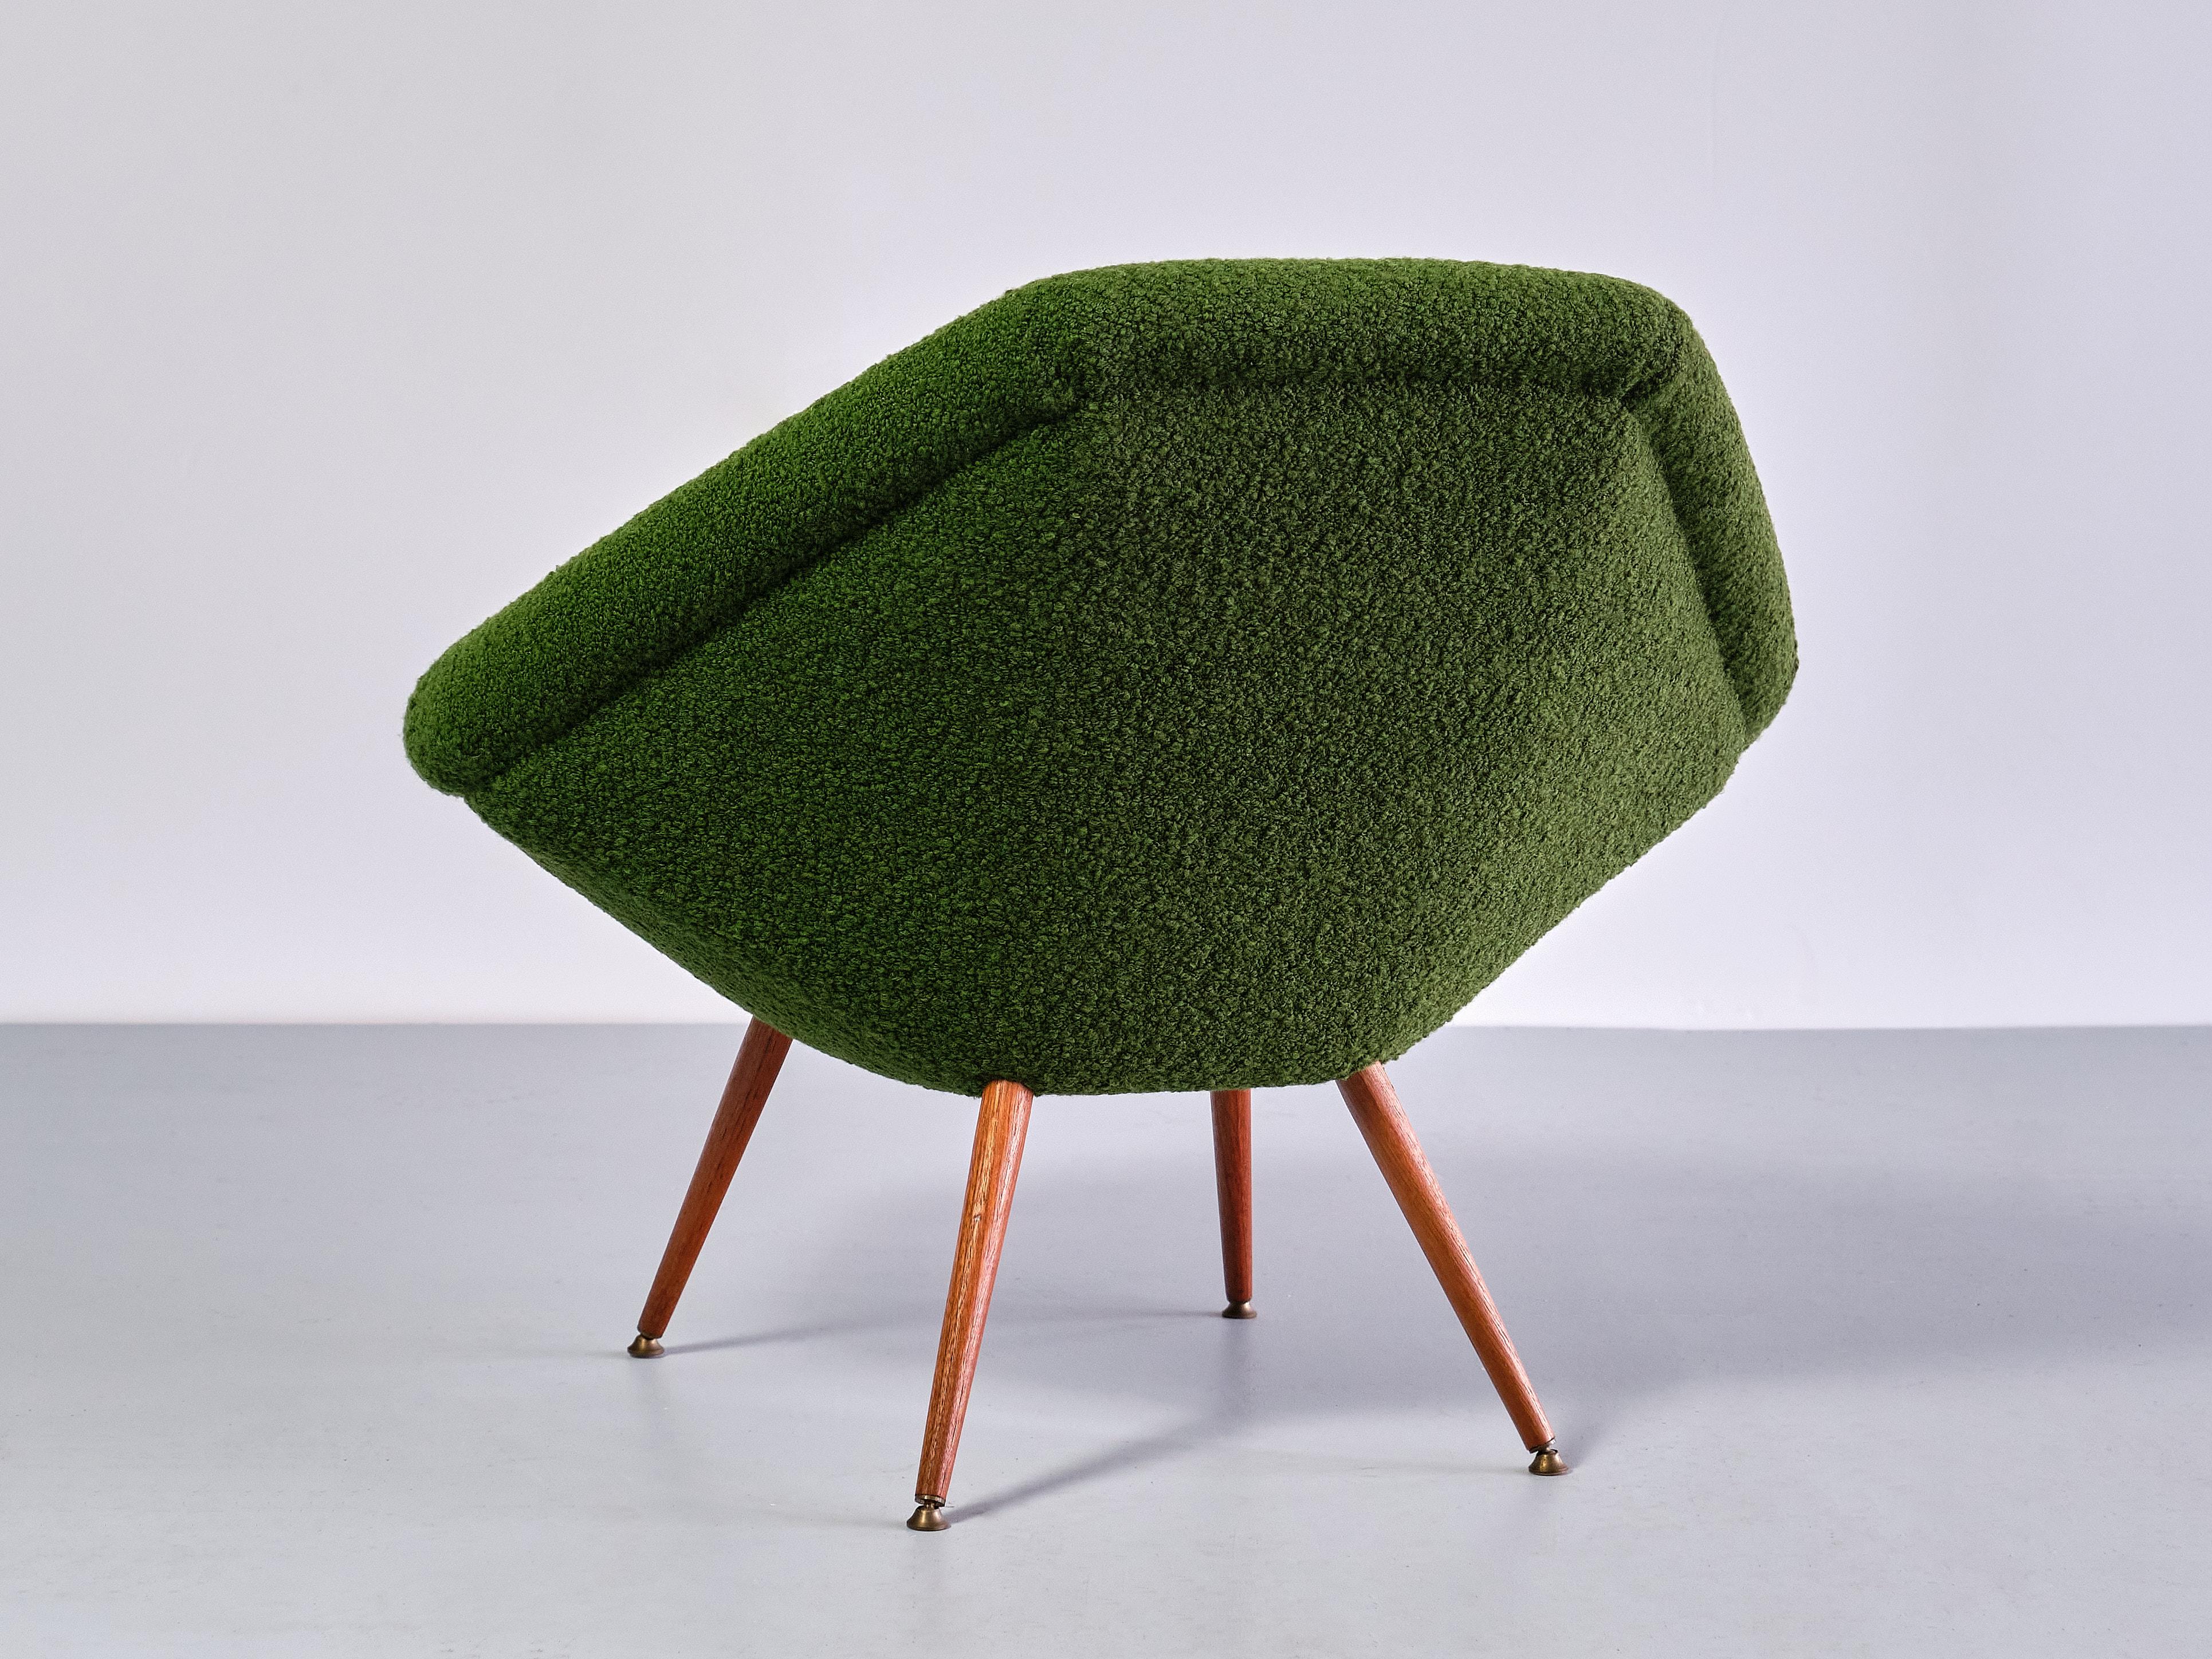 Pair of Arne Dahlén Lounge Chairs in Green Bouclé and Teak, Sweden, 1960s For Sale 3